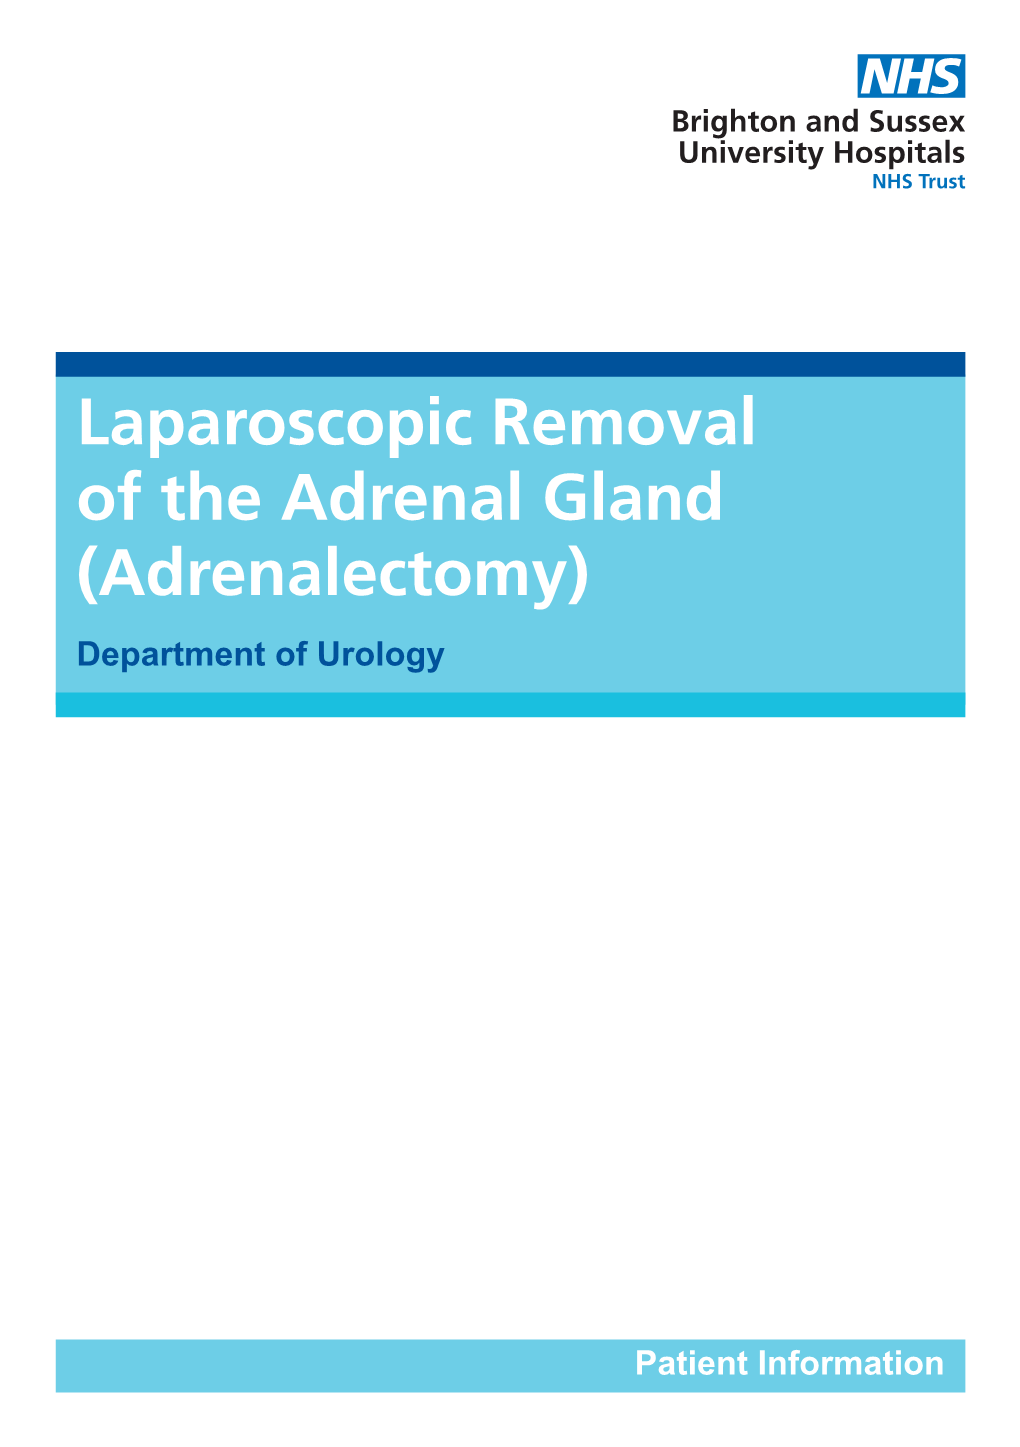 Laparoscopic Removal of the Adrenal Gland (Adrenalectomy) Department of Urology